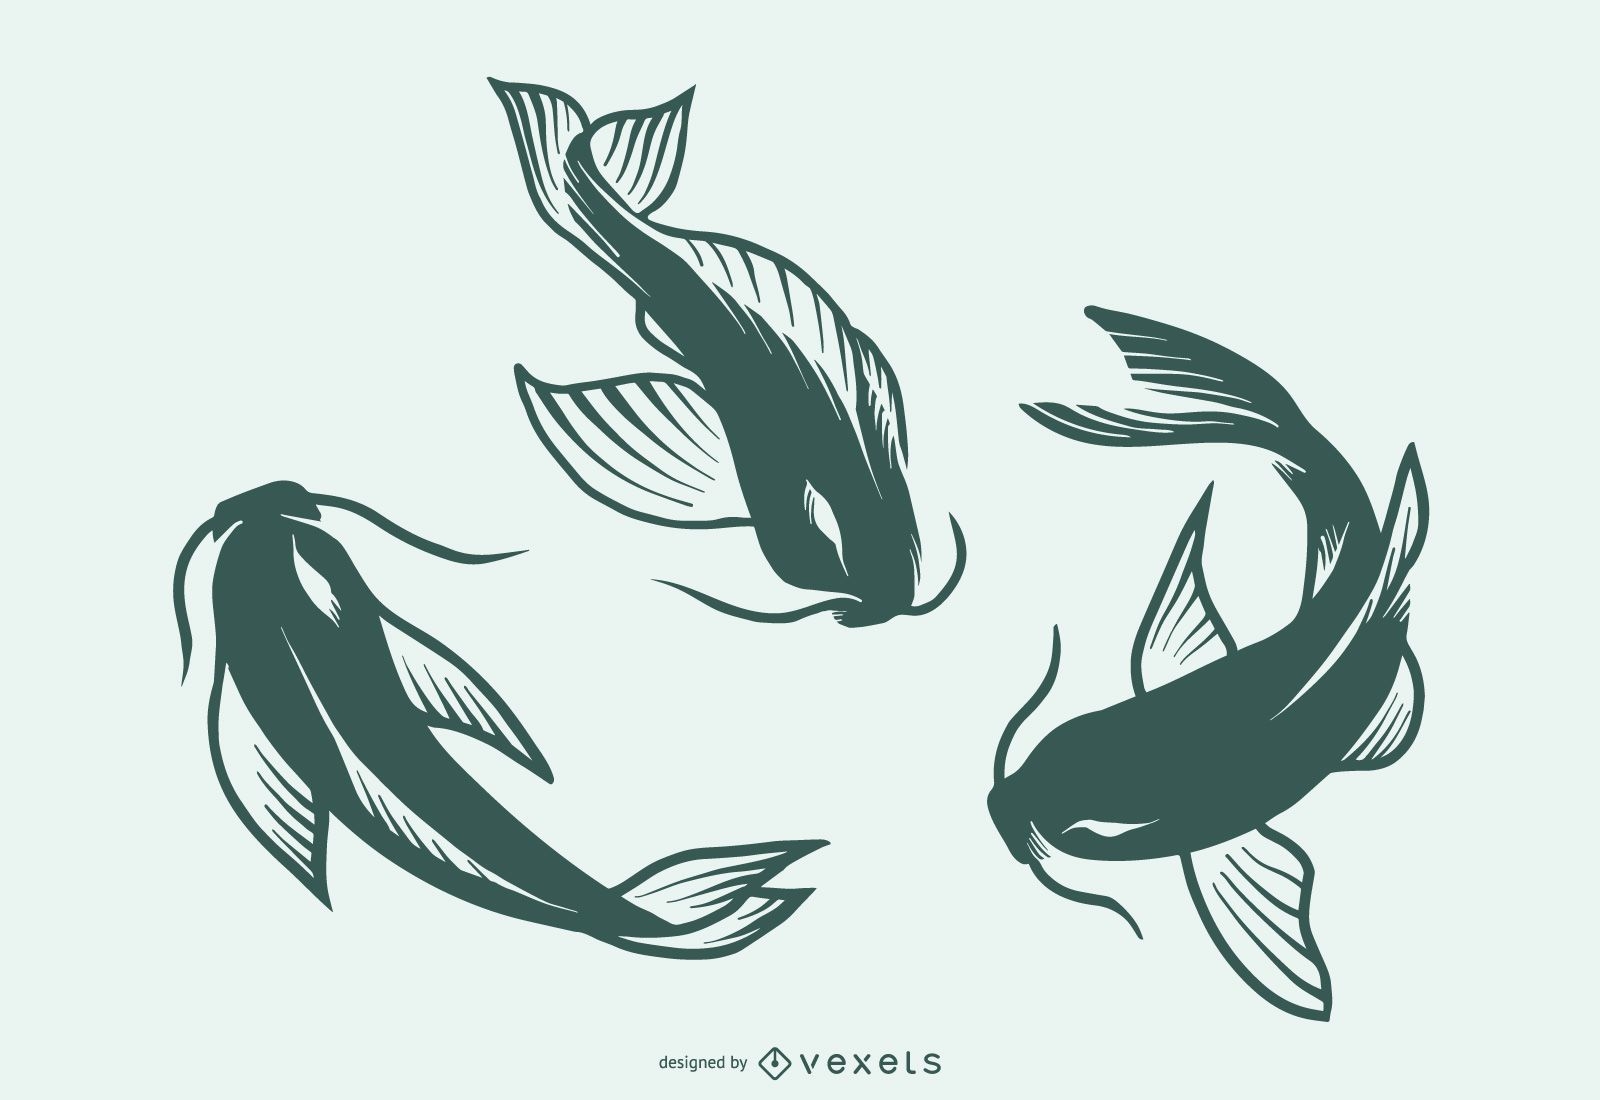 Hand Drawn Outline Koi Fish Tattoo Stock Vector Royalty Free 587758769   Shutterstock